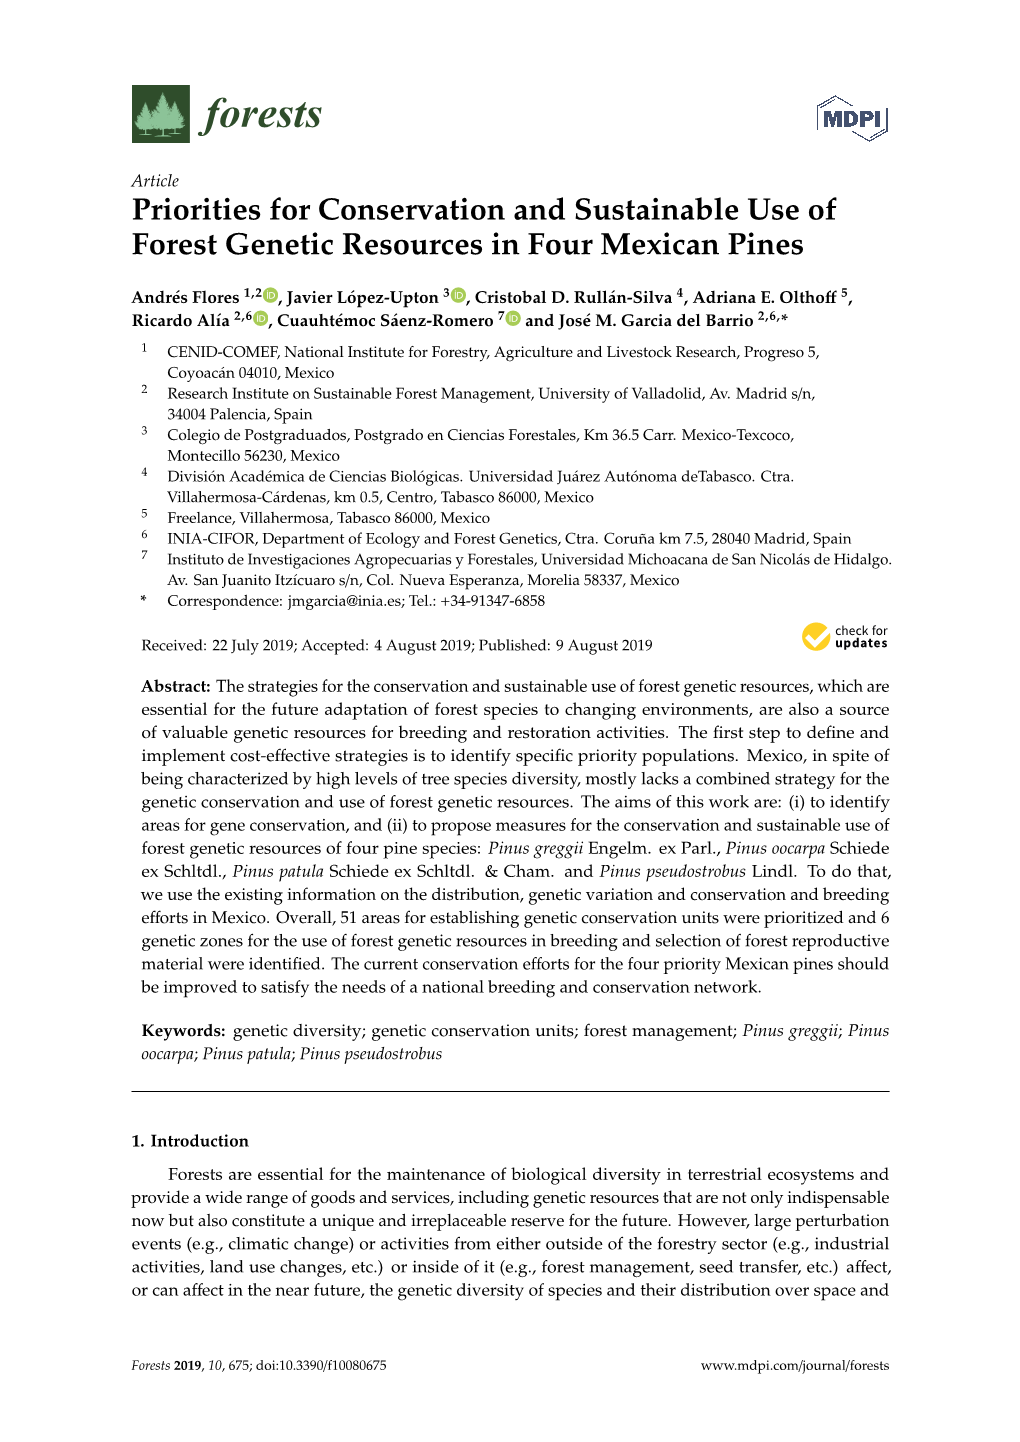 Priorities for Conservation and Sustainable Use of Forest Genetic Resources in Four Mexican Pines